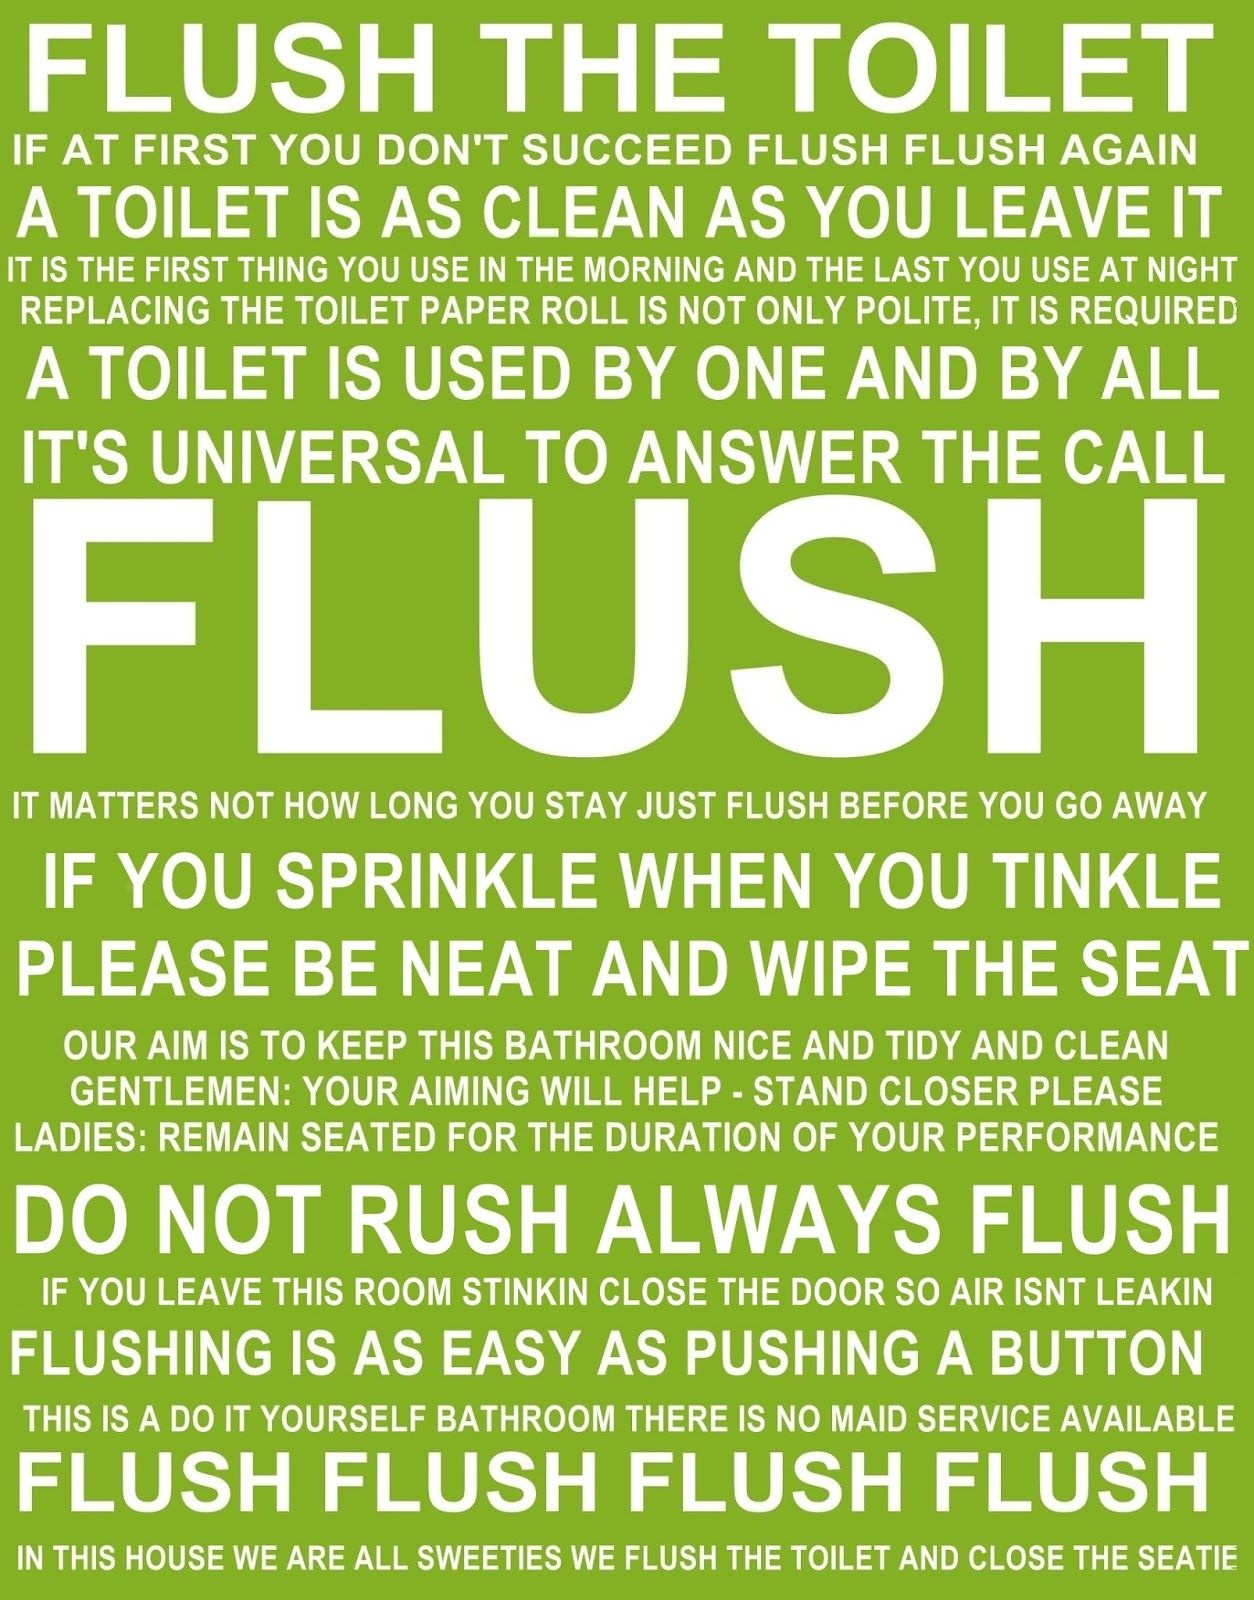 Flush The Toilet Quotes And Sayings Free Printable | Bathroom - Free Printable Flush The Toilet Signs